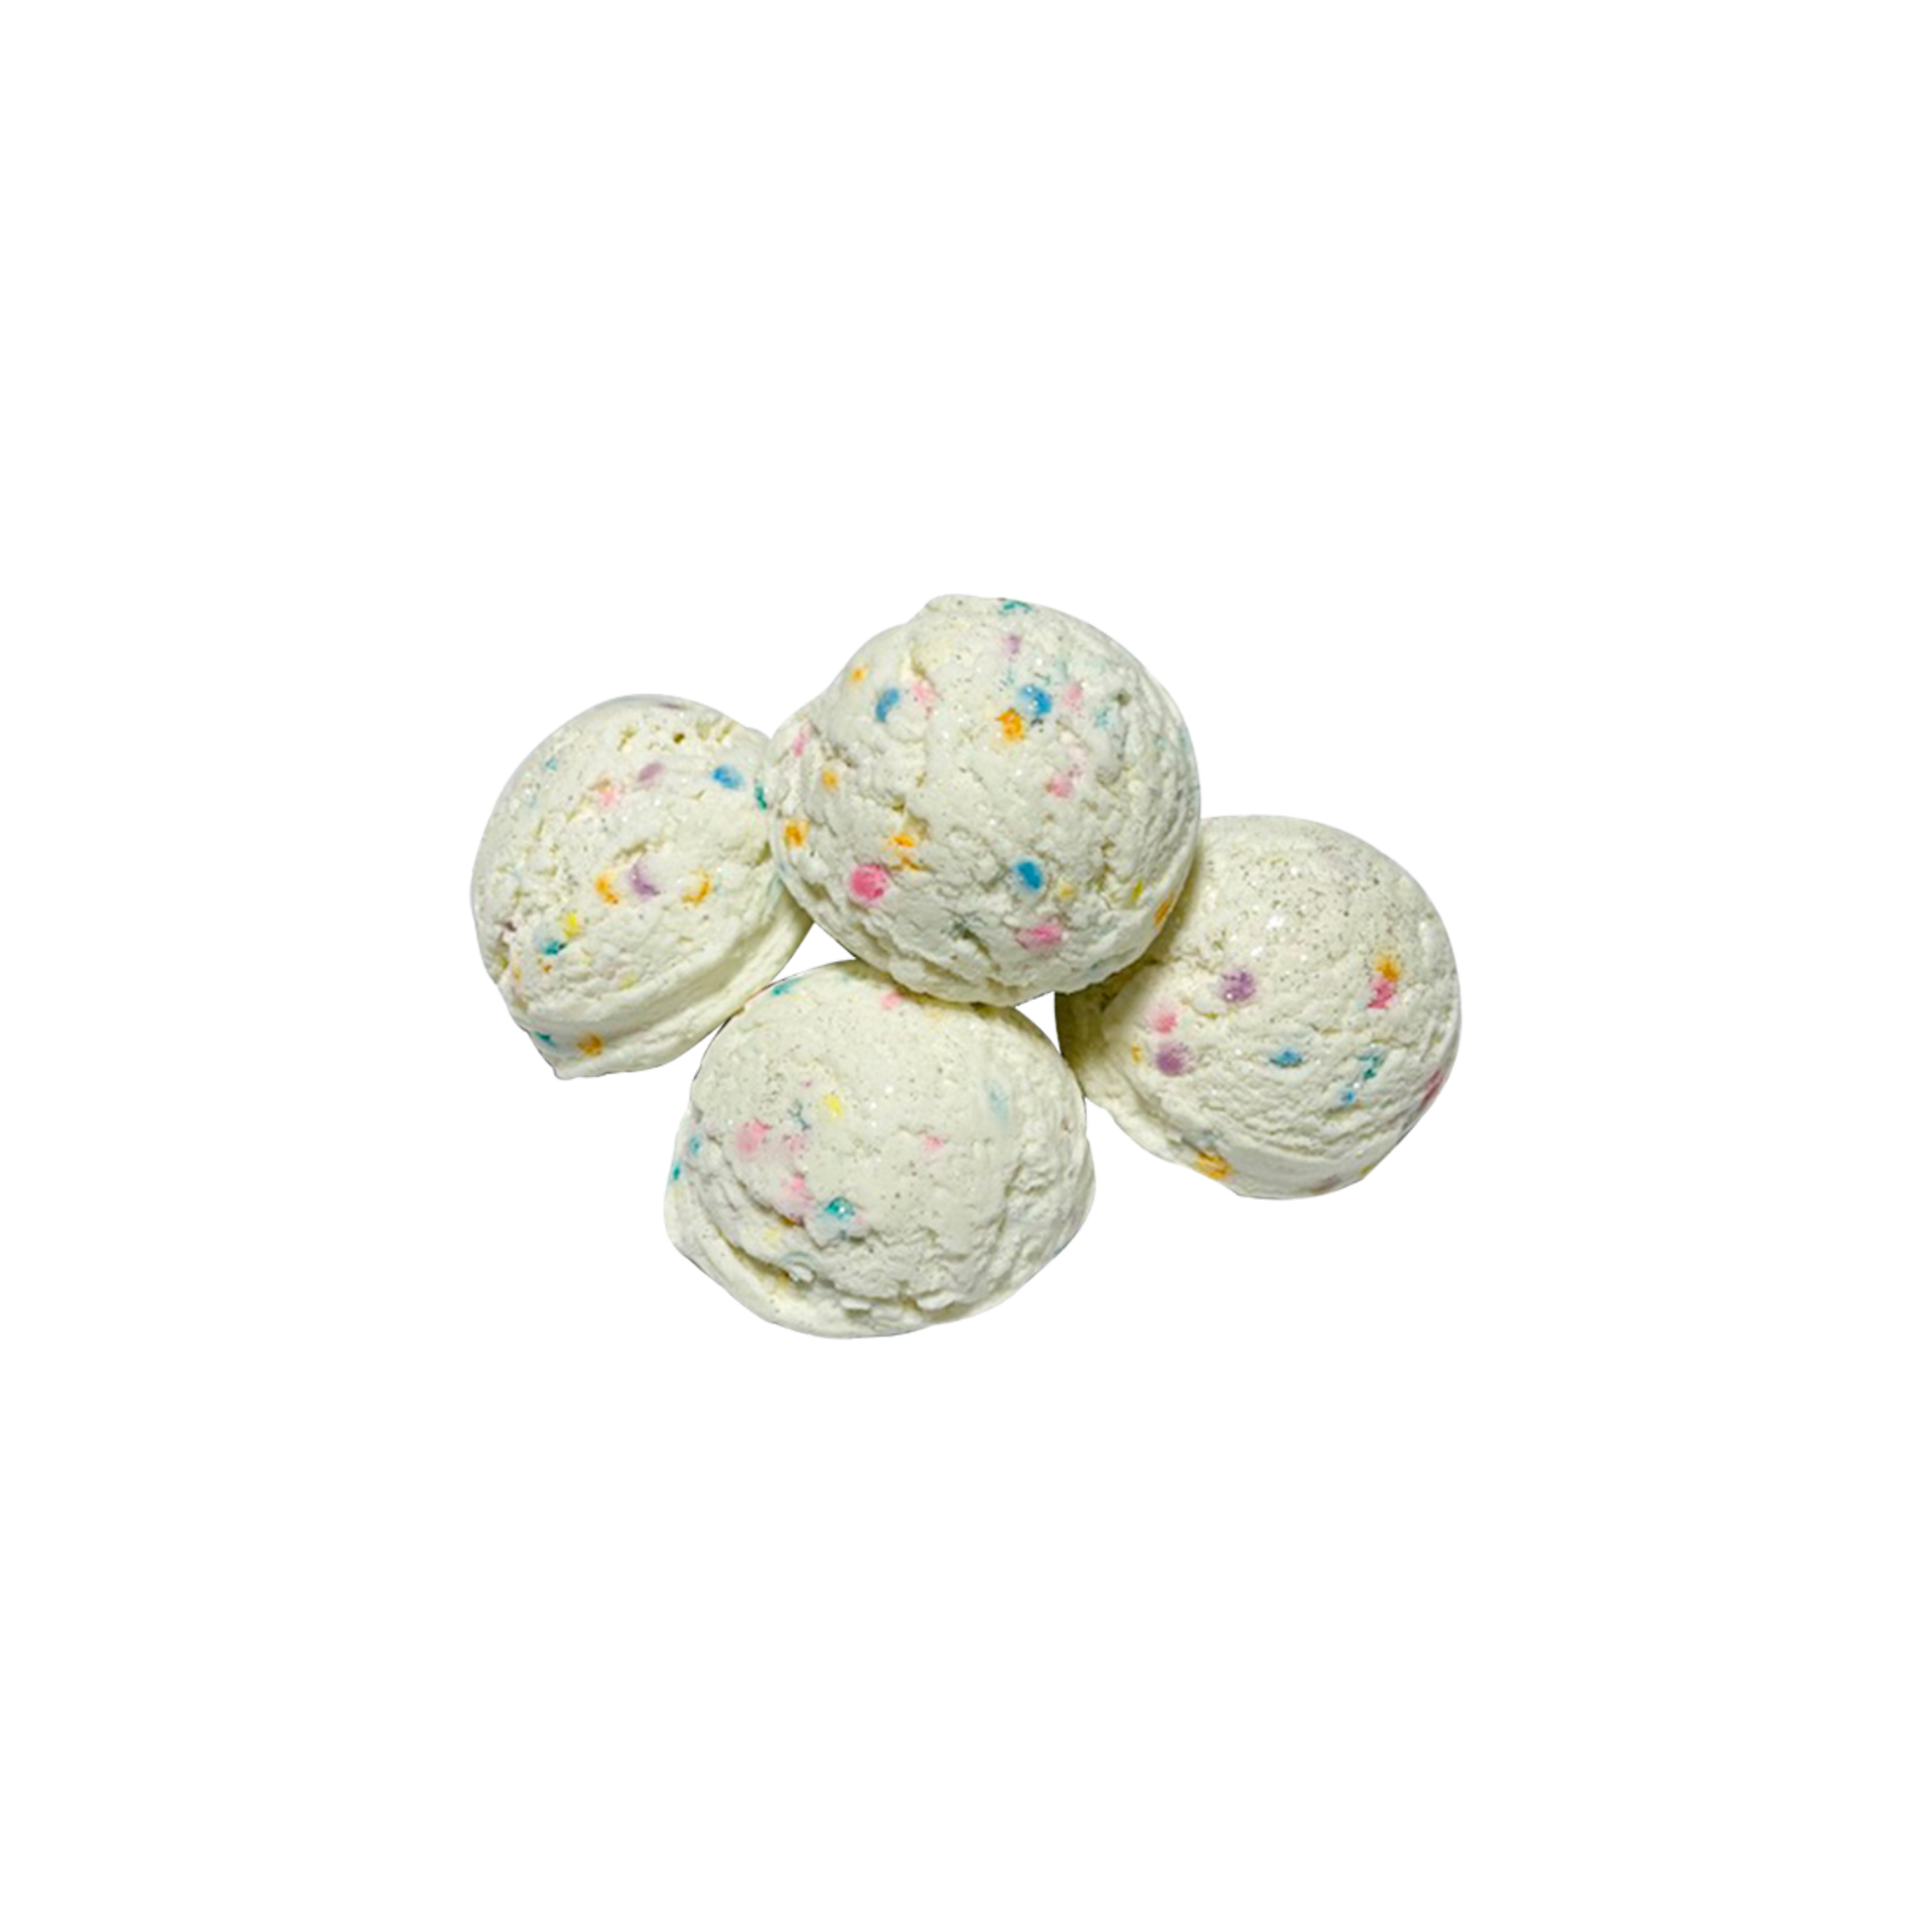 Burffday Cake Bubble Scoop  bath bomb made natural wholesale handmade bath products private label made in usa.png